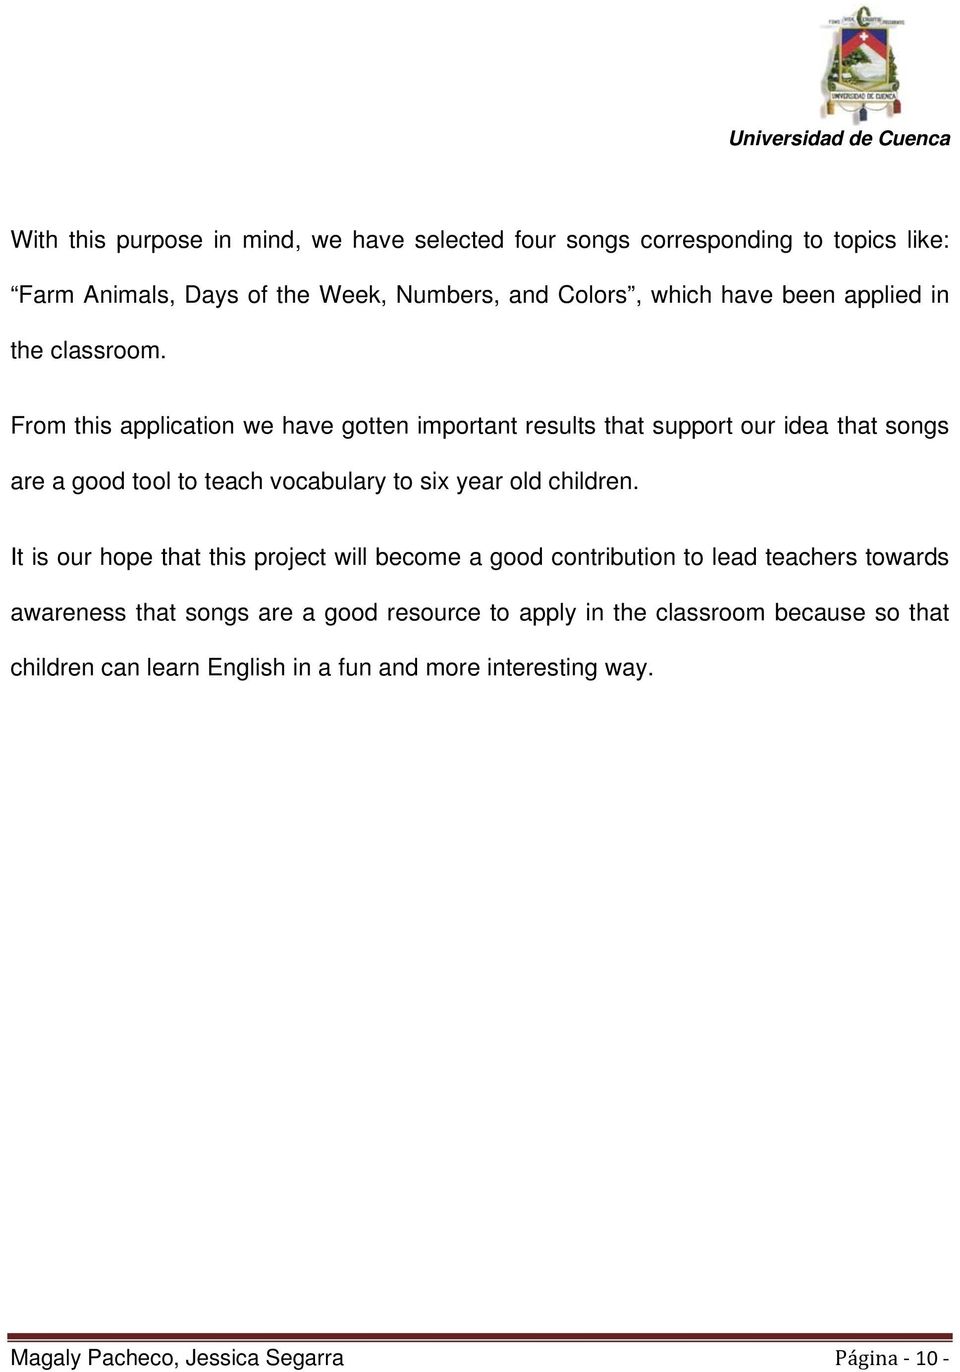 From this application we have gotten important results that support our idea that songs are a good tool to teach vocabulary to six year old children.